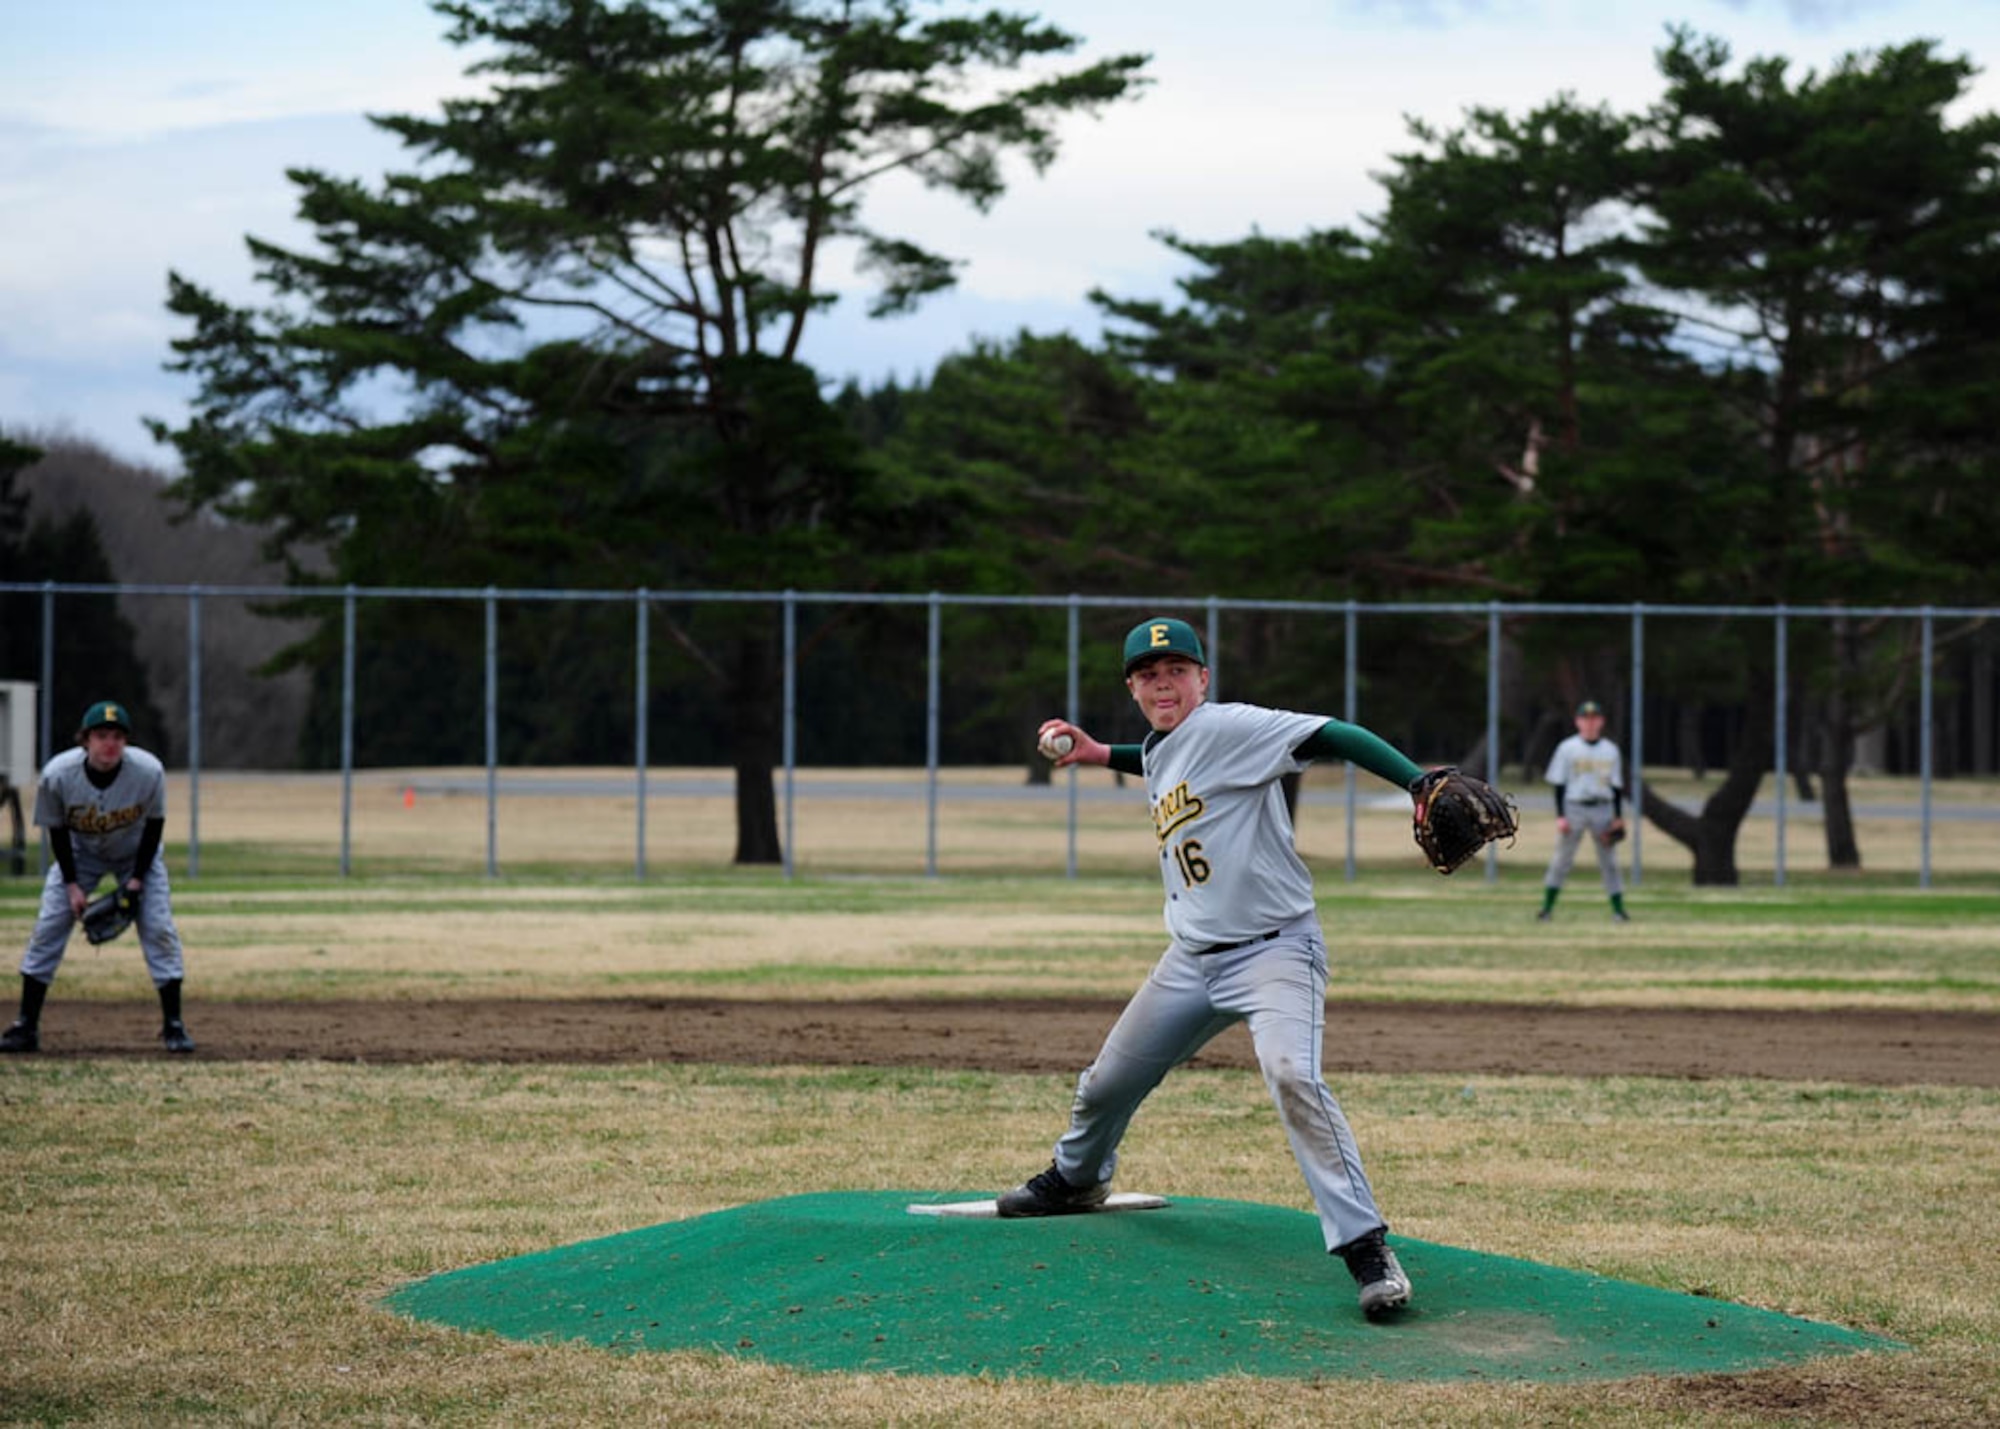 Ethan, son of Master Sgt. Brian Barry, 35th Civil Engineer Squadron facilities superintendent, pitches a ball to the opposing team as his teammates anticipate the upcoming play during the second game of the weekend at Misawa Air Base, Japan, April 15, 2017. During the first game the team watched as Ethan got hit in the face with a high-speed baseball. They didn’t except him to pitch the second game, but without hesitation Ethan showed up ready to play. (U.S. Air Force photo by Tech. Sgt. April Quintanilla)